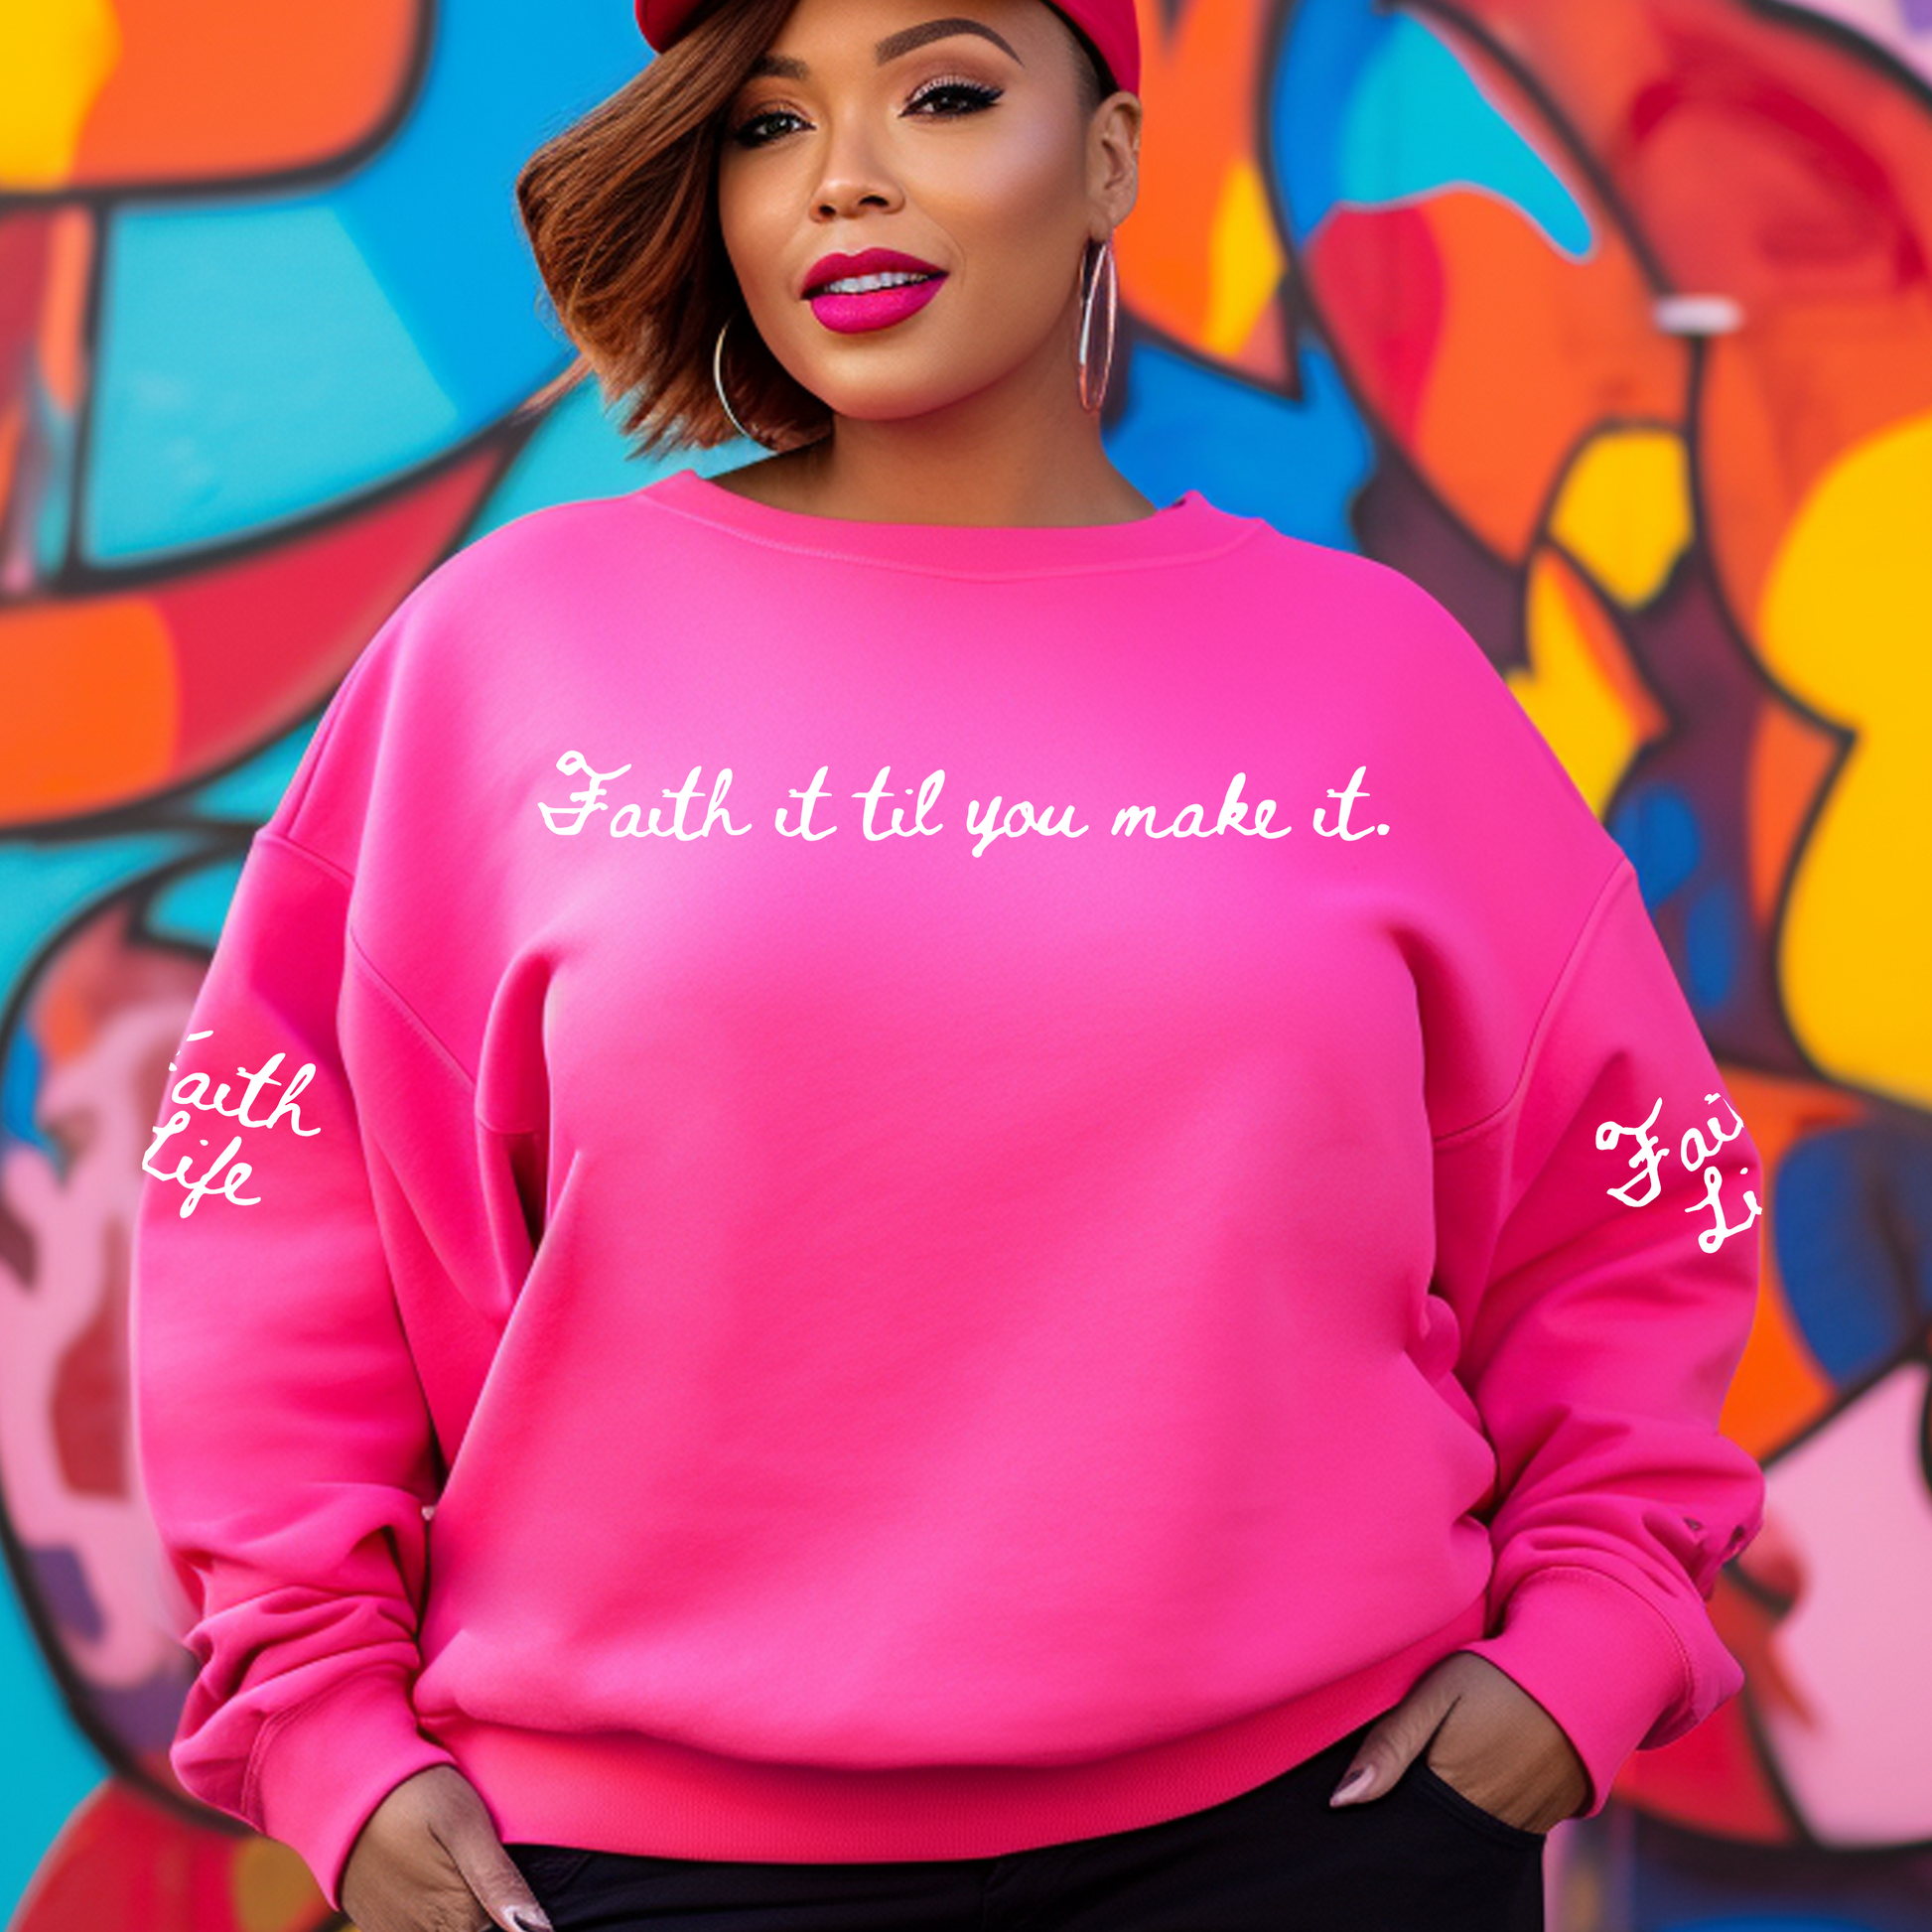 Buy our Faith it til you make it pink sweatshirt. Wear our comfortable faith clothing if you're a believer who knows you have the faith to get through anything. This unique sweatshirt is comfortable and soft enough to wear everyday.